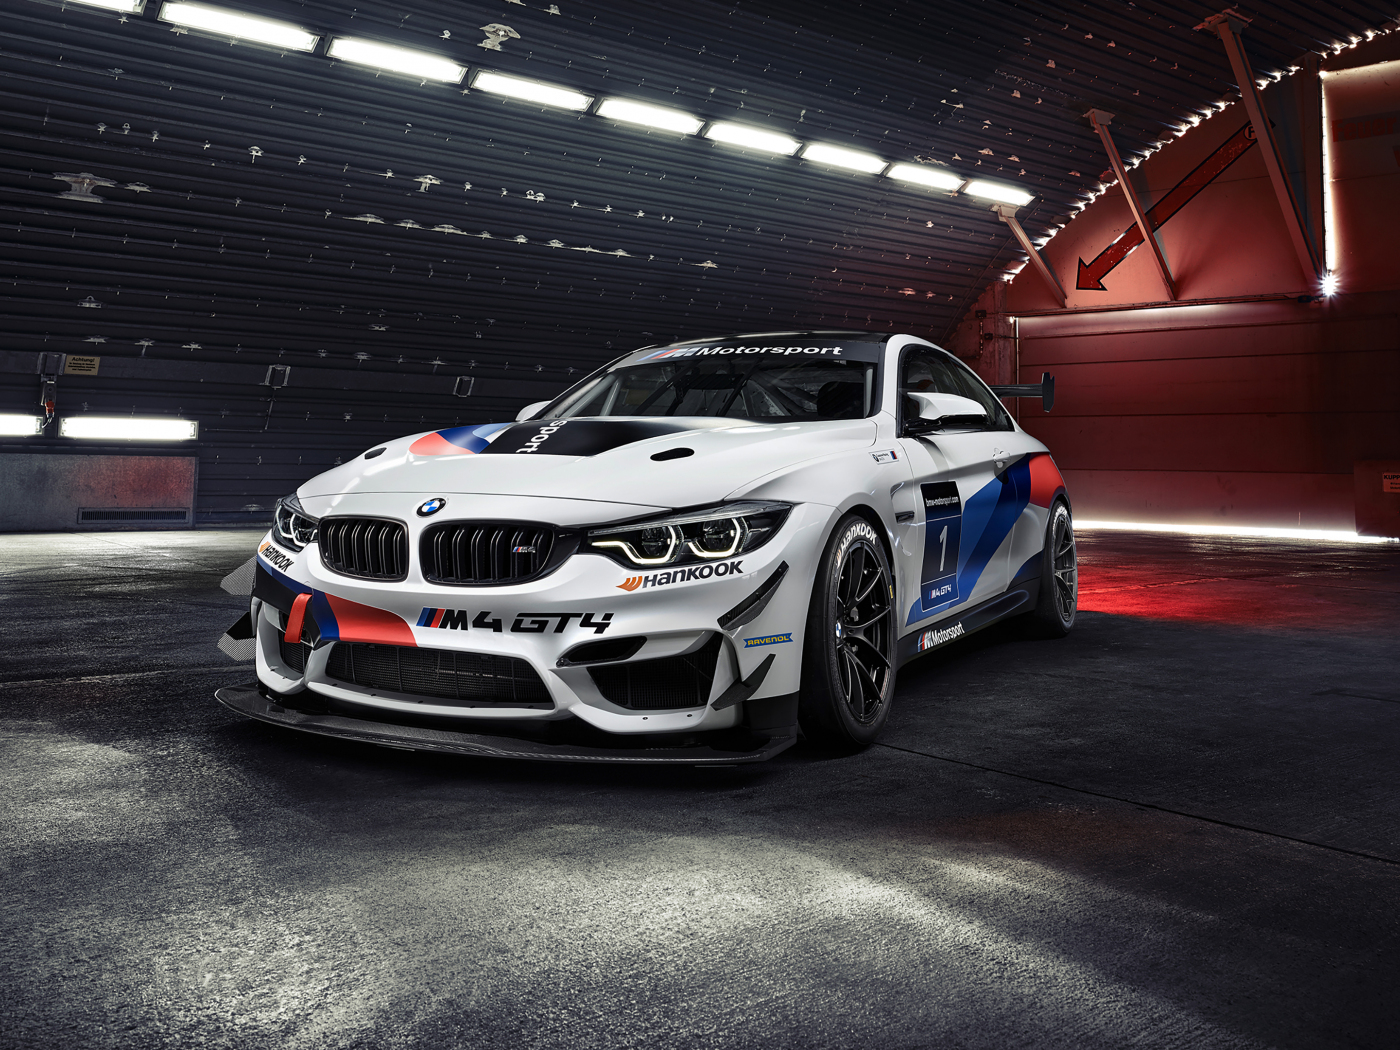 Download wallpaper 1400x1050 luxury car, front-view, bmw m4 gt4 ...